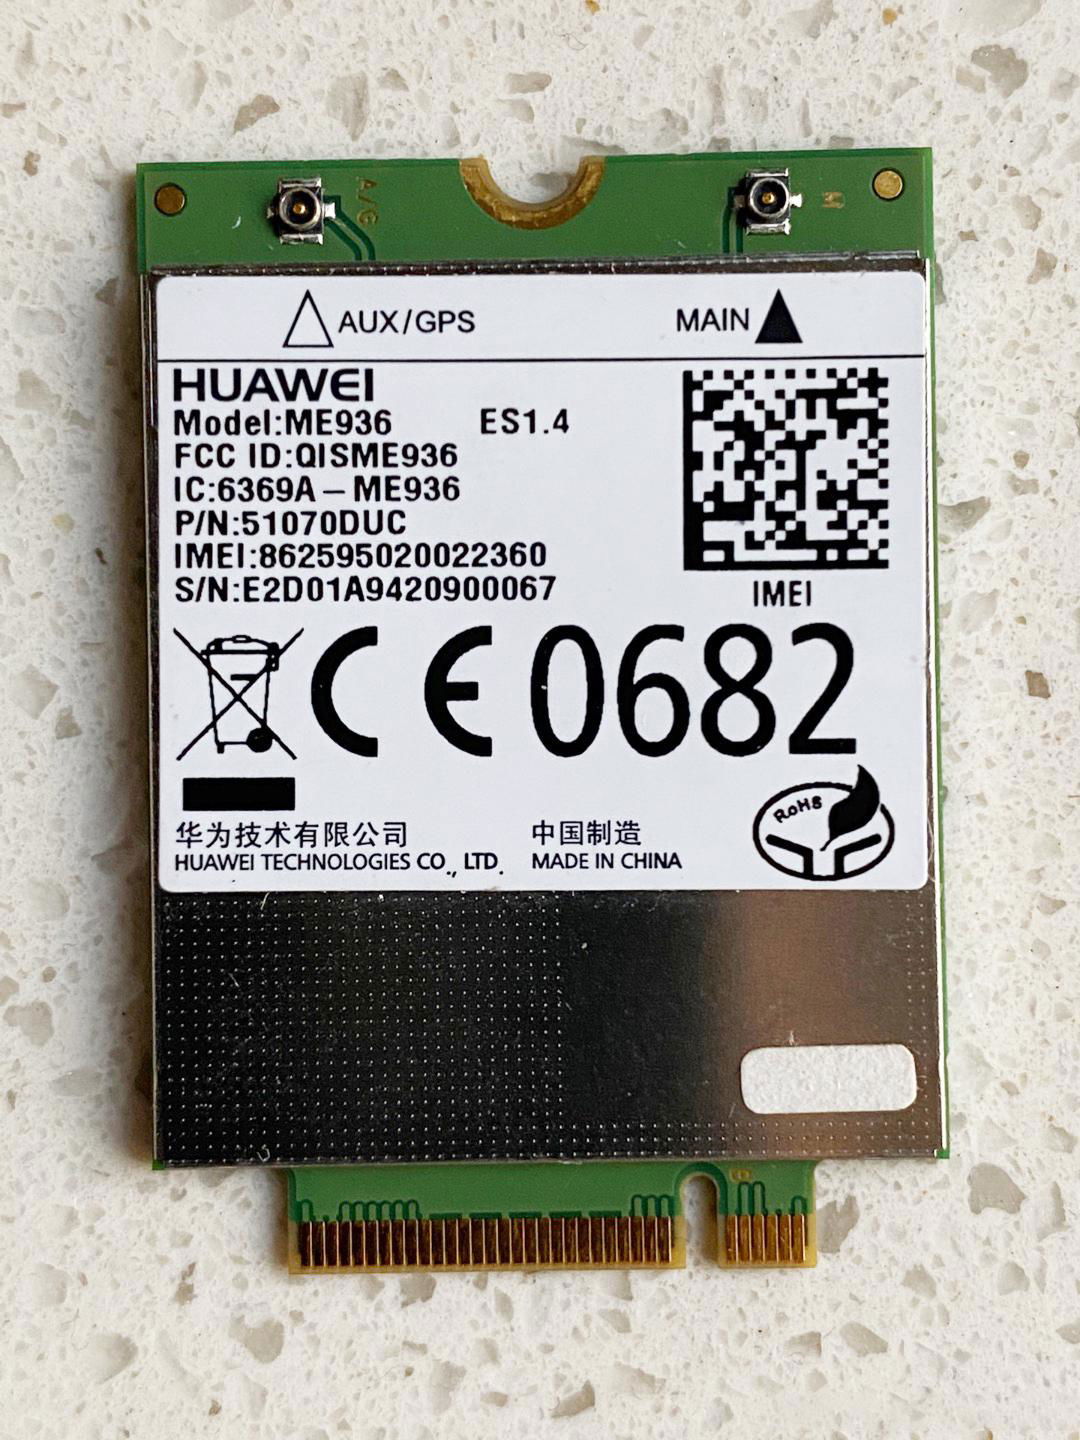 Huawei ME936 4G LTE Module, Support 2G 3G HSPA WCDMA Network